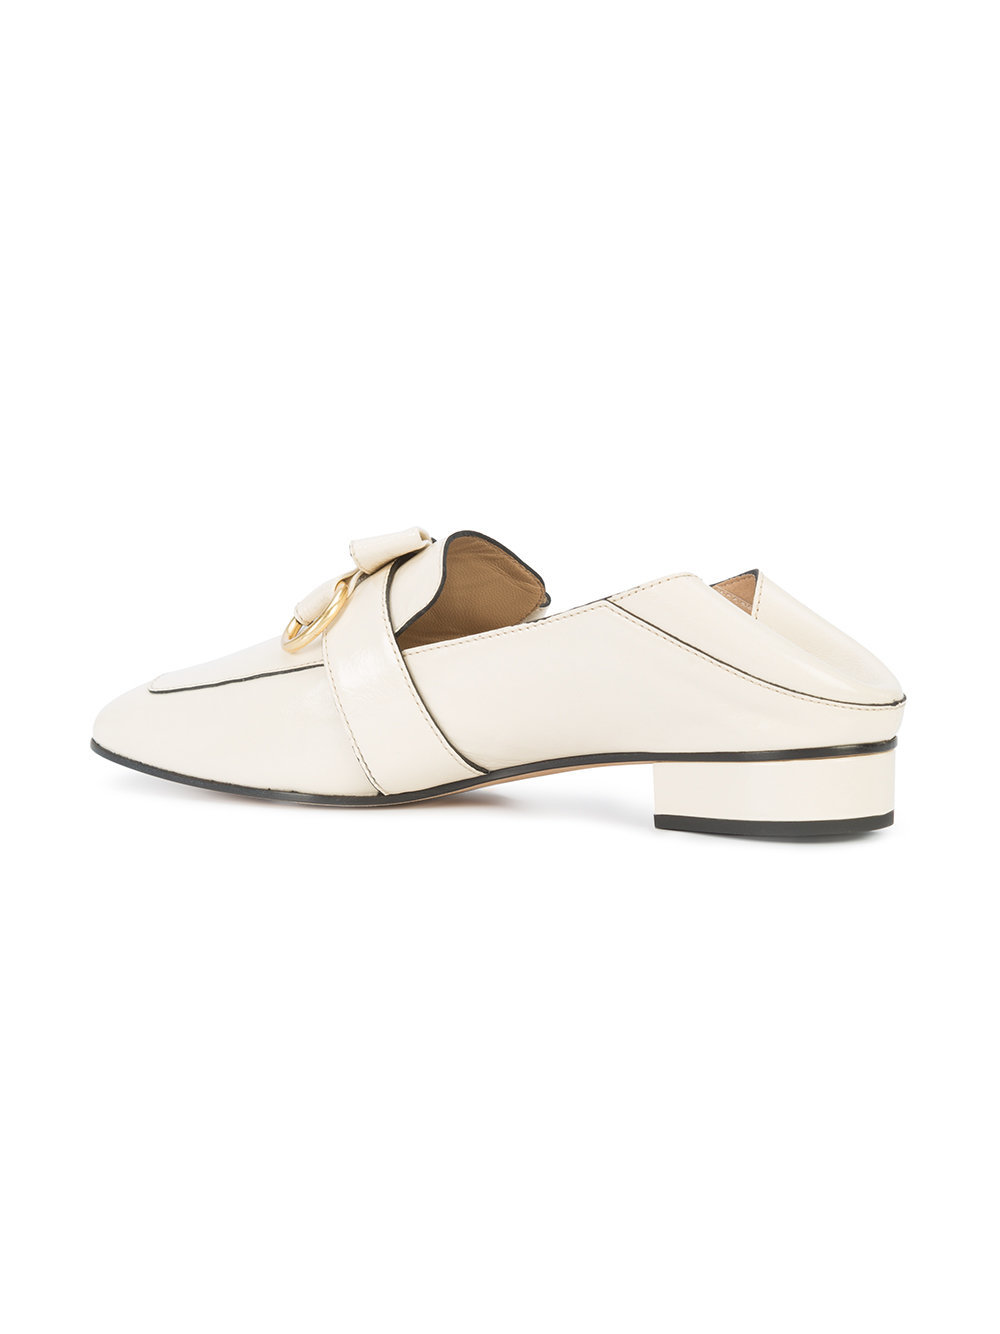 chloe convertible loafer